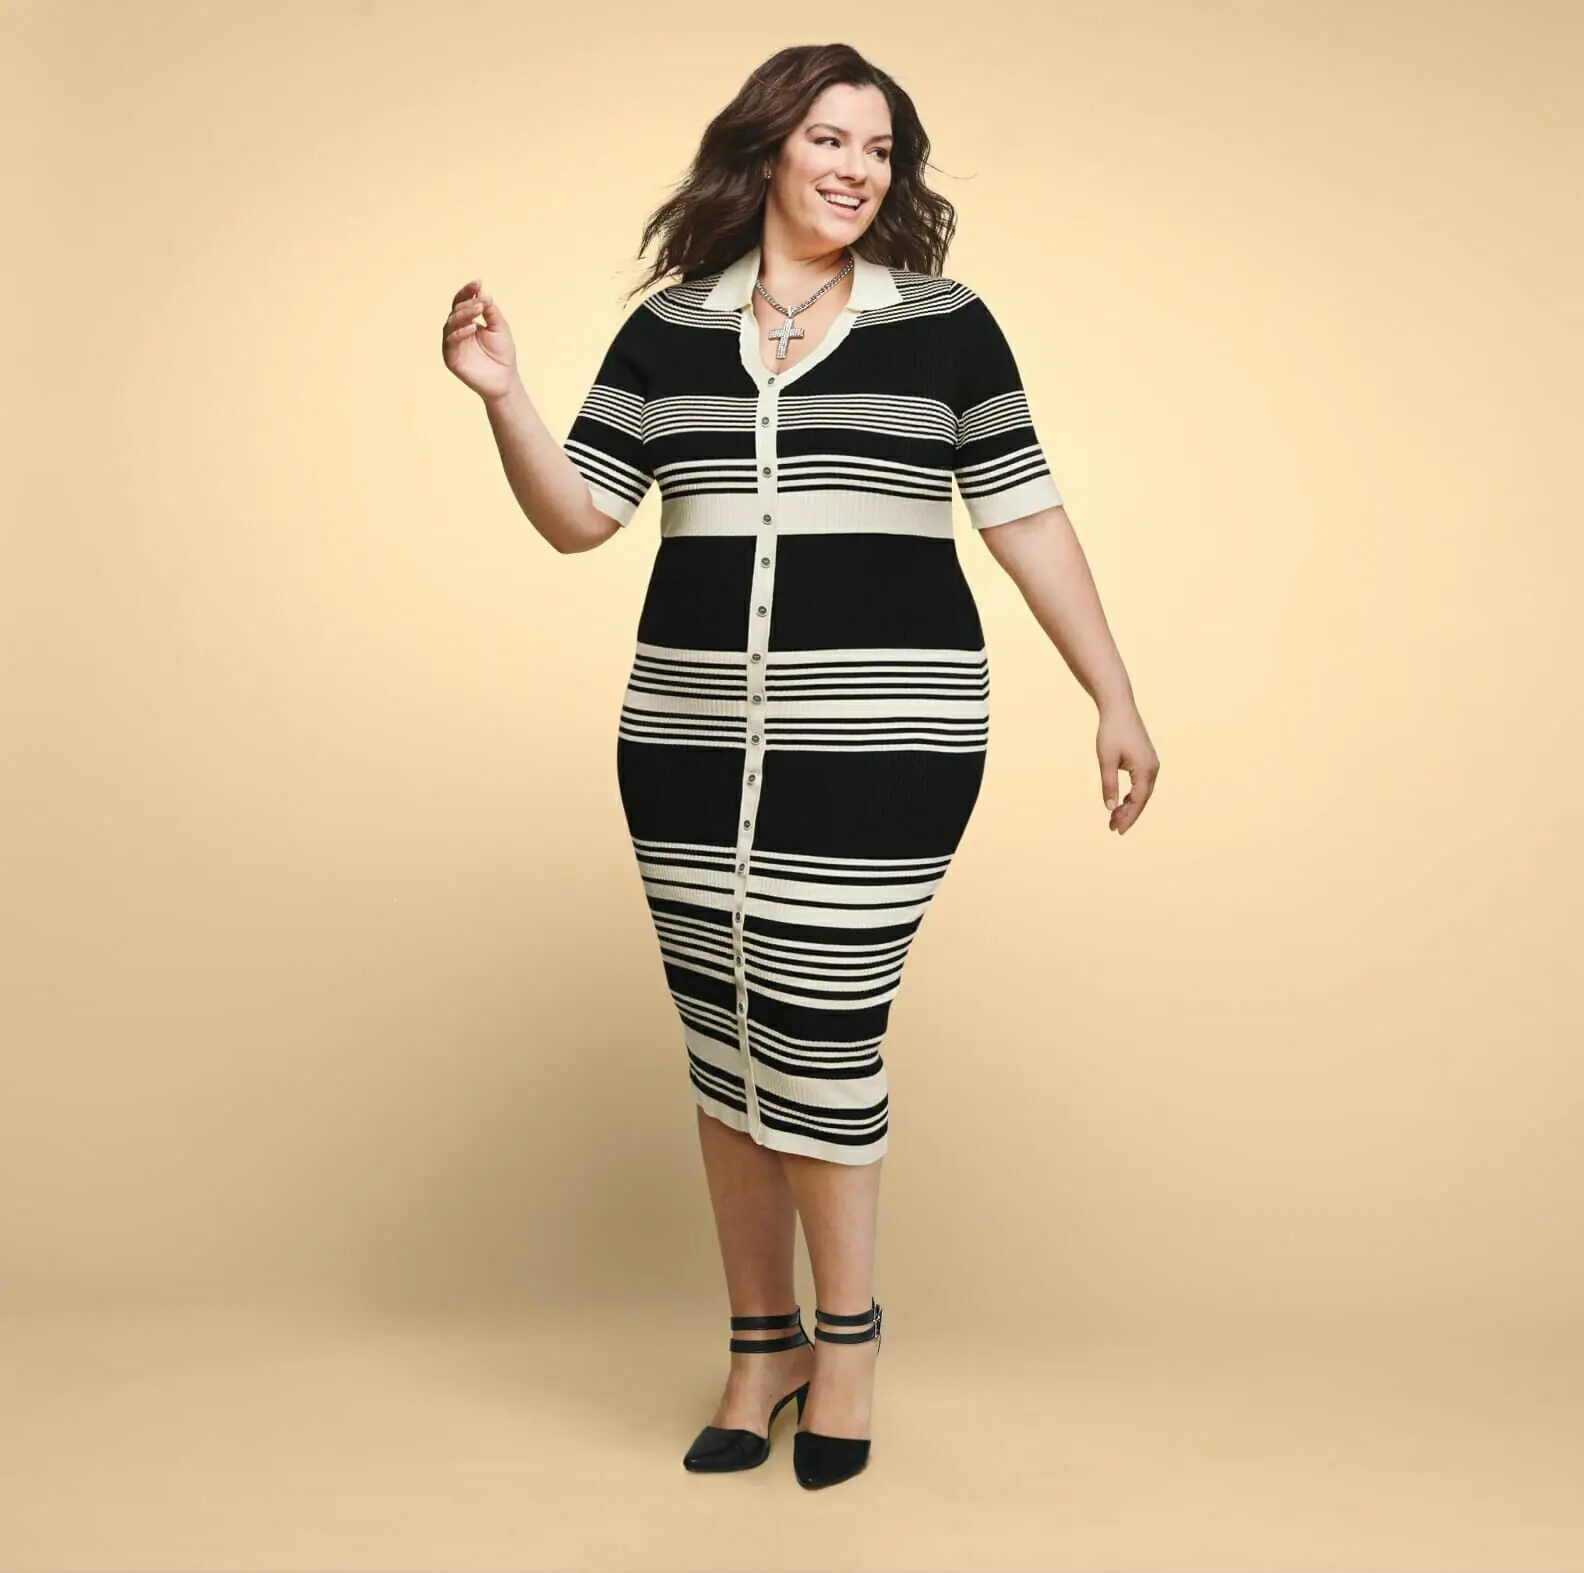 Best dress styles for plus-sizes